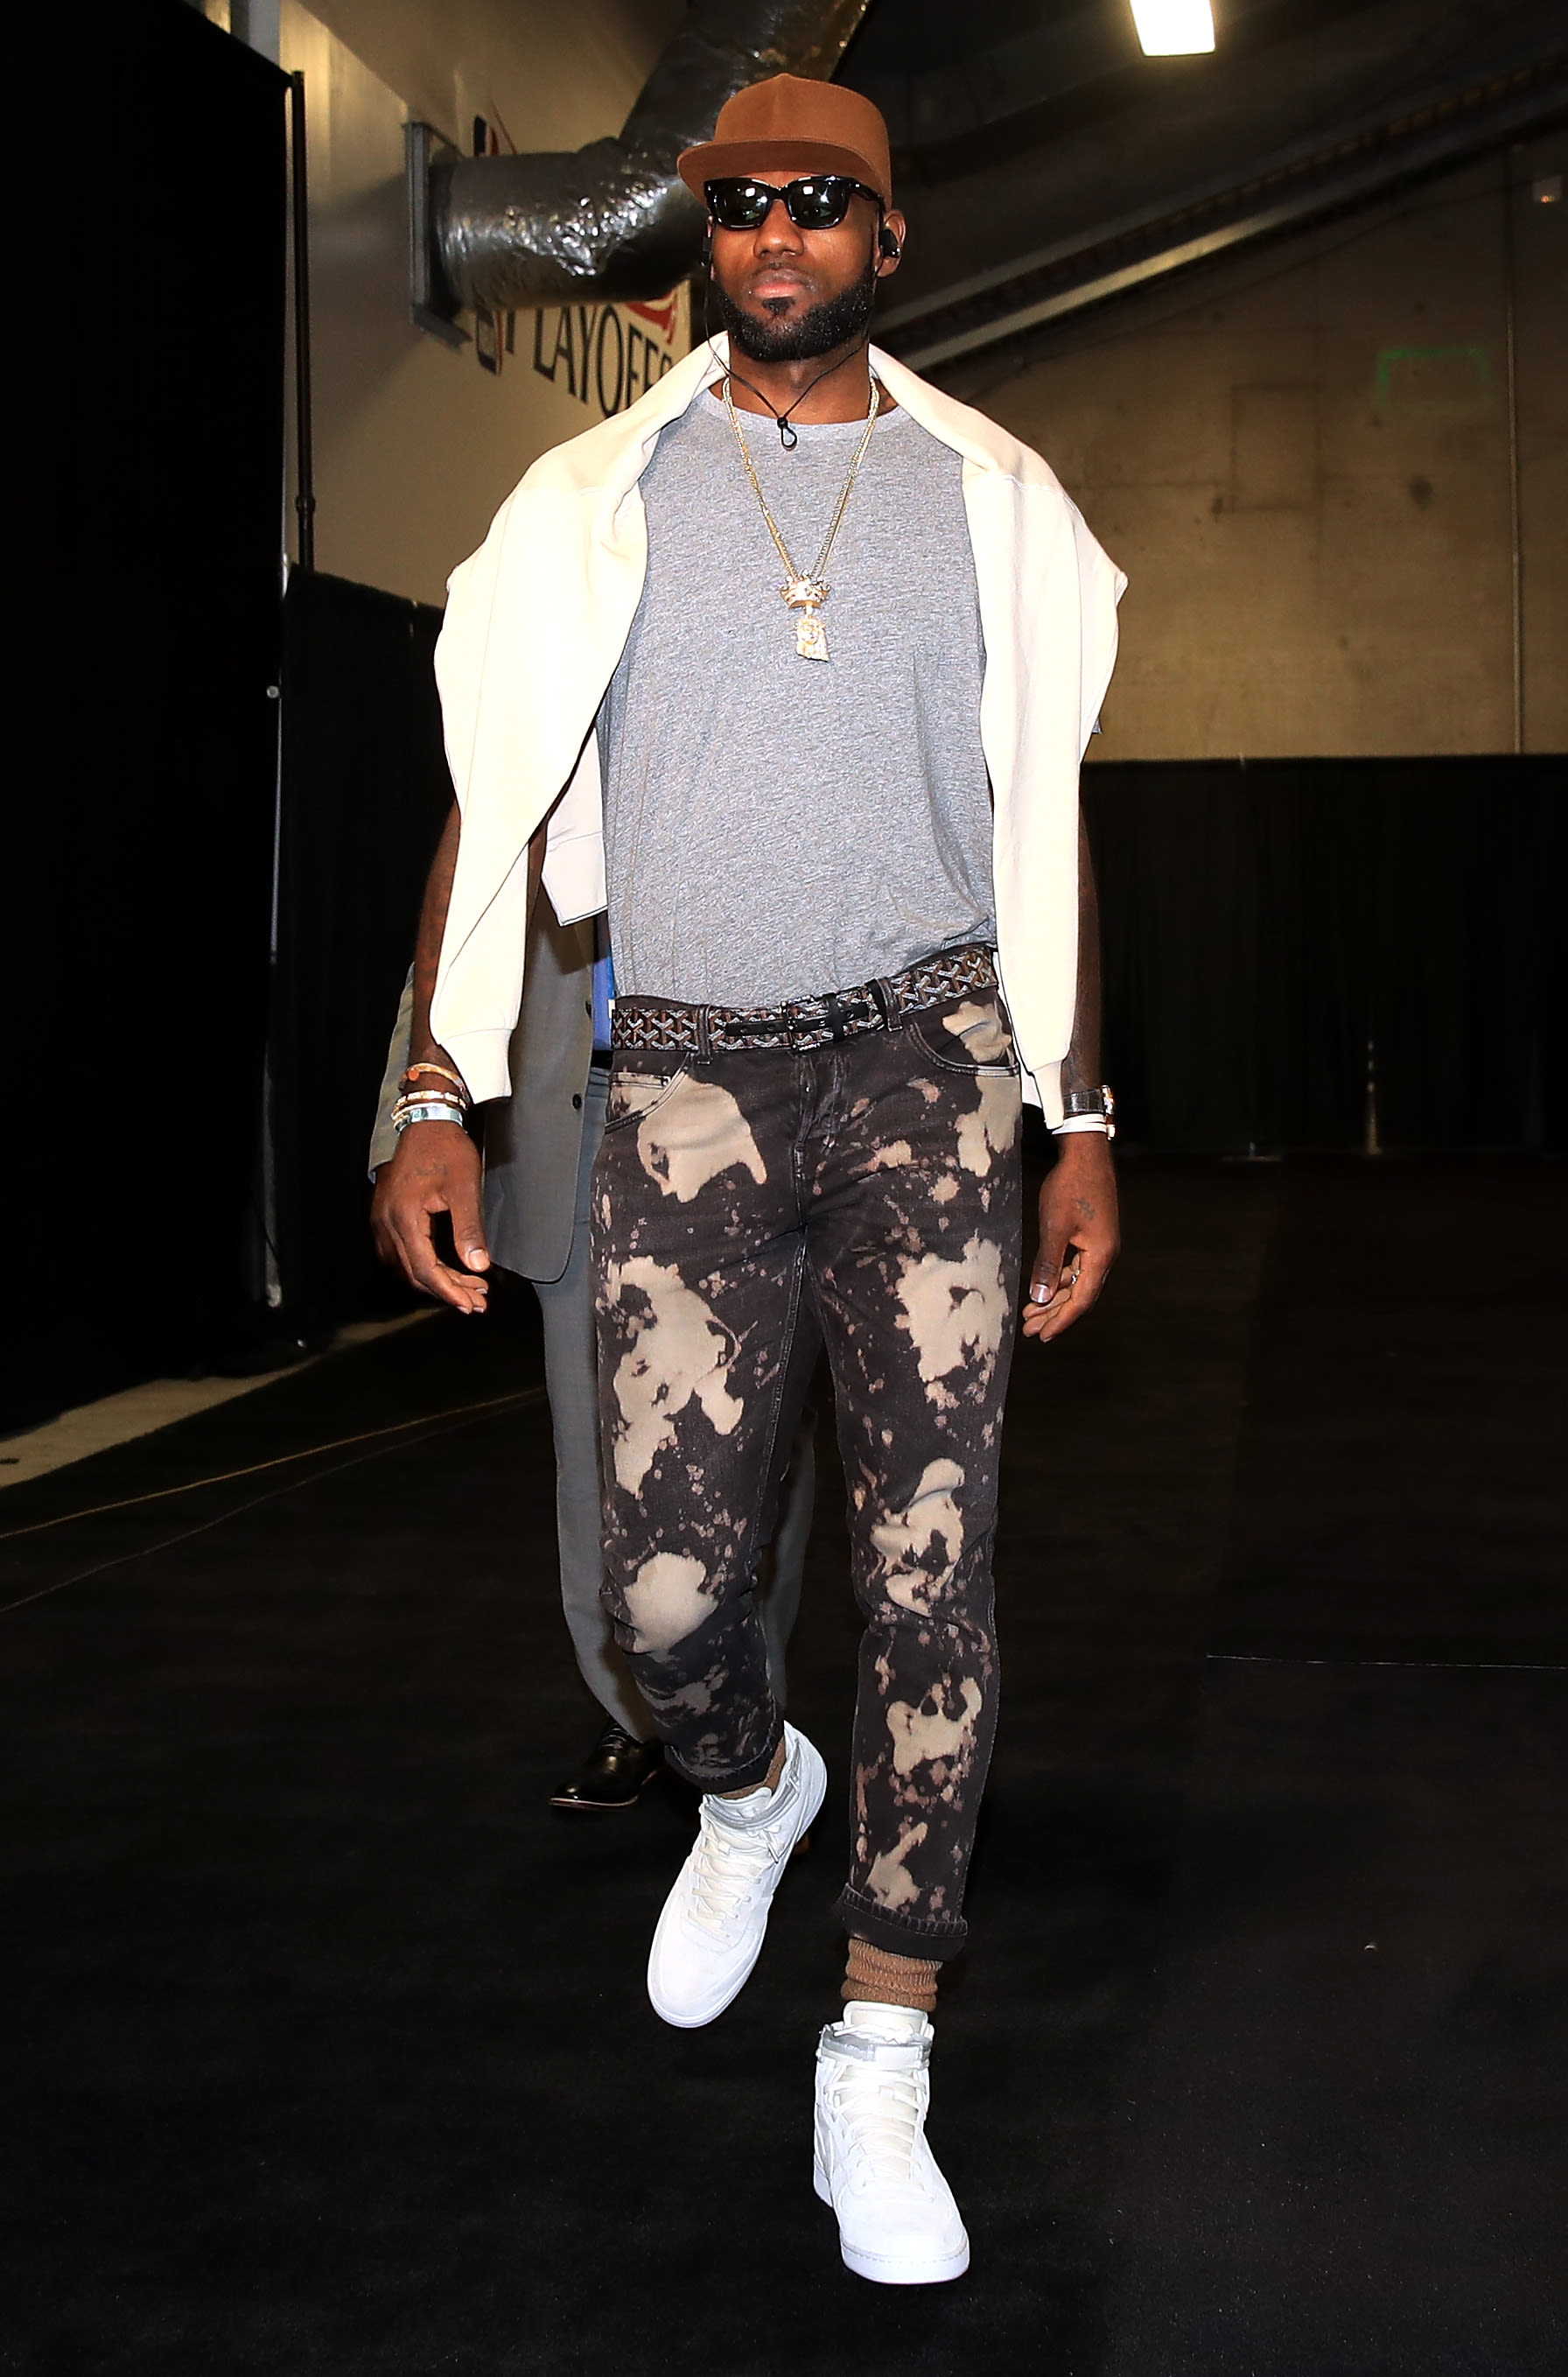 lebron shoes outfit